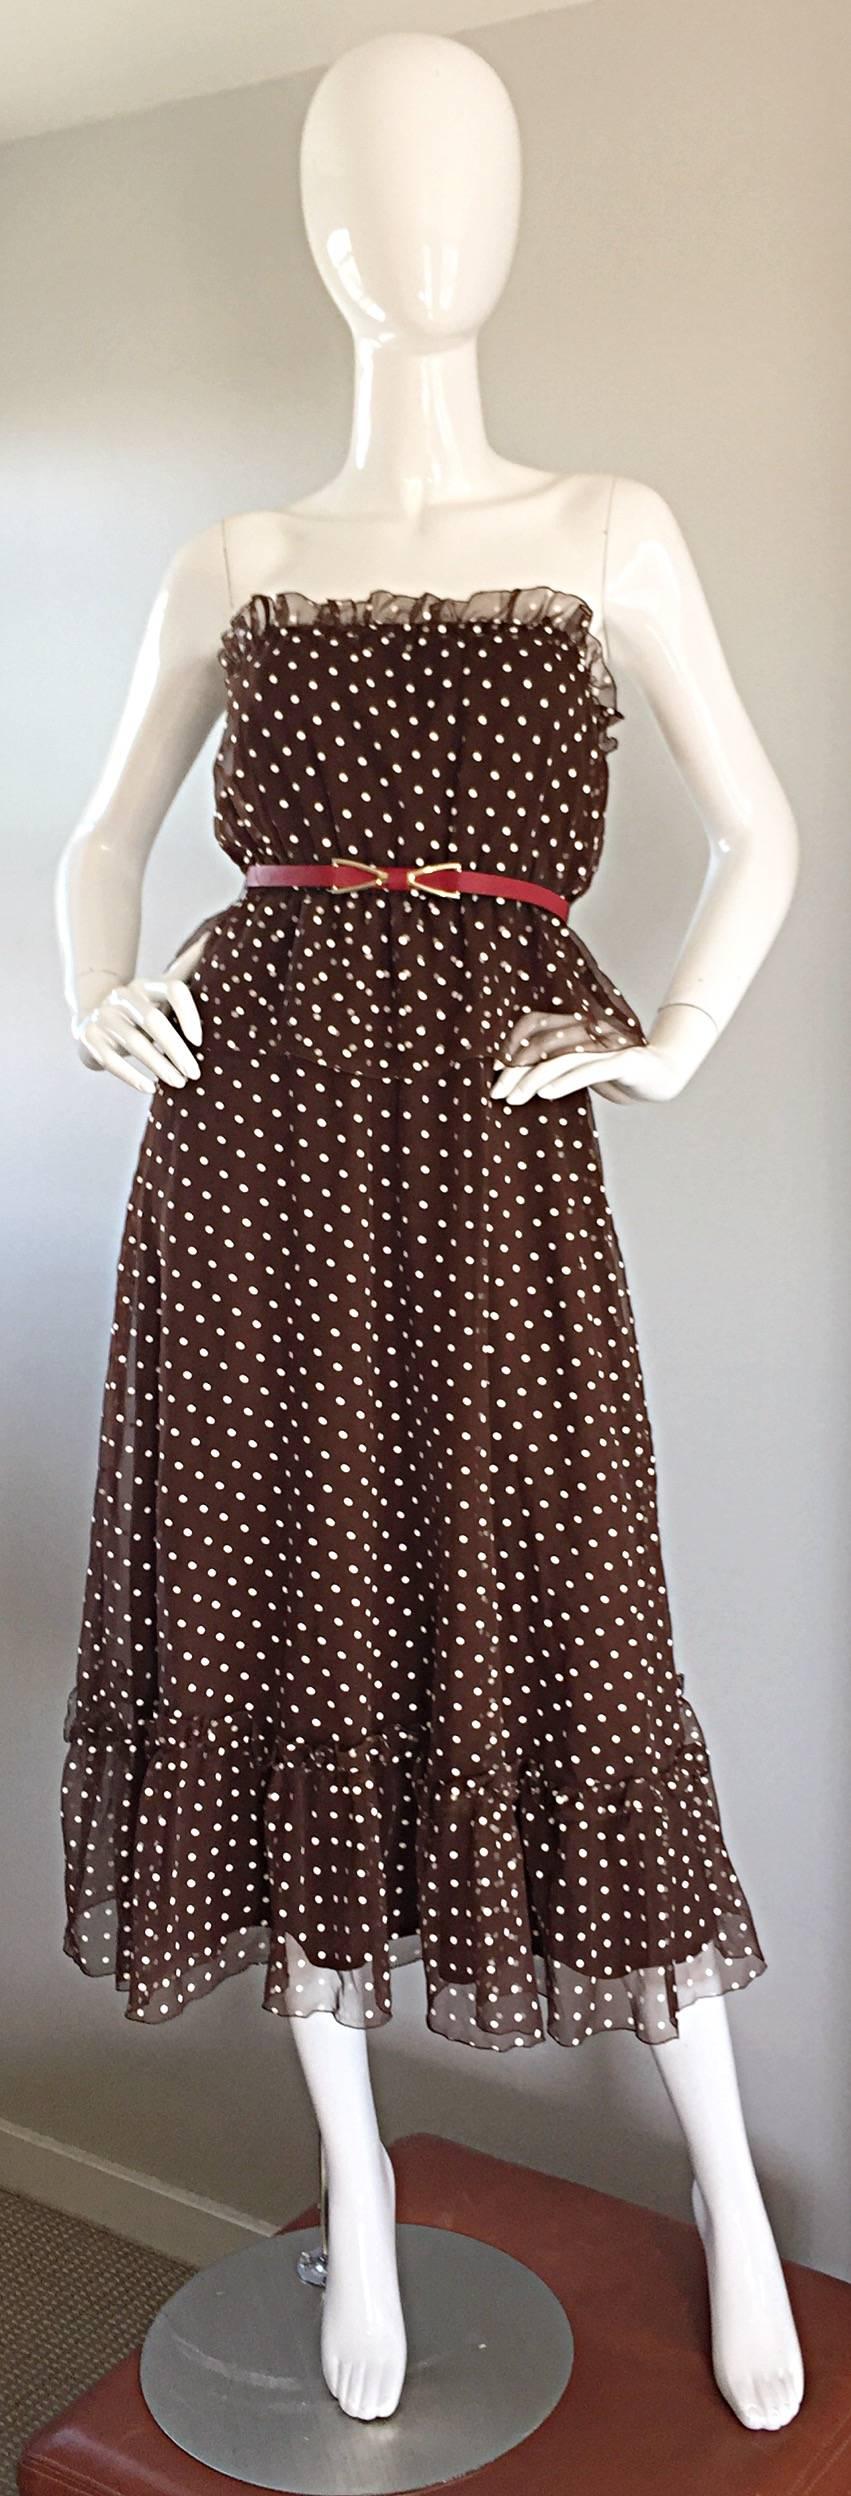 Chic vintage (late 1970s early 1980s) PAT RICHARDS for BULLOCKS WILSHIRE brown and white polka dot dress, with original detachable red 'wishbone' leather belt! Features a chiffon ruffled bust, hem, with a peplum at waist. Can be worn with straps, or